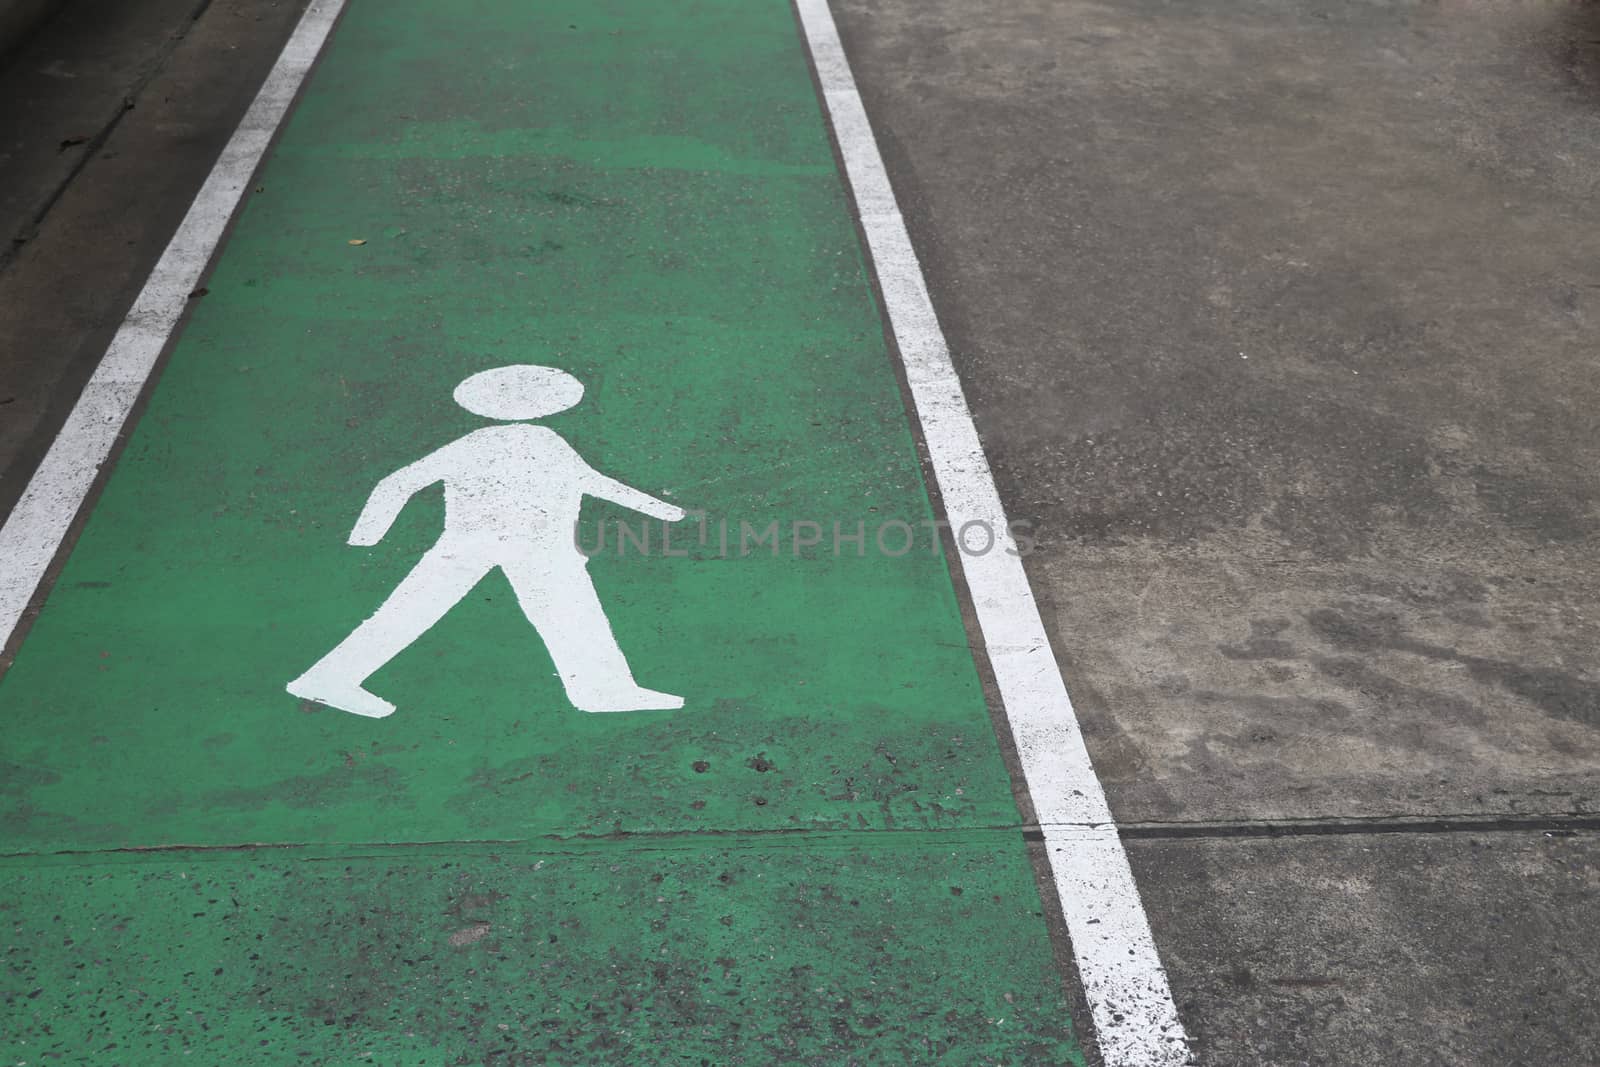 Walking way for the safety of traveling. Symbol for pedestrian paths. Specific pathway for pedestrians.